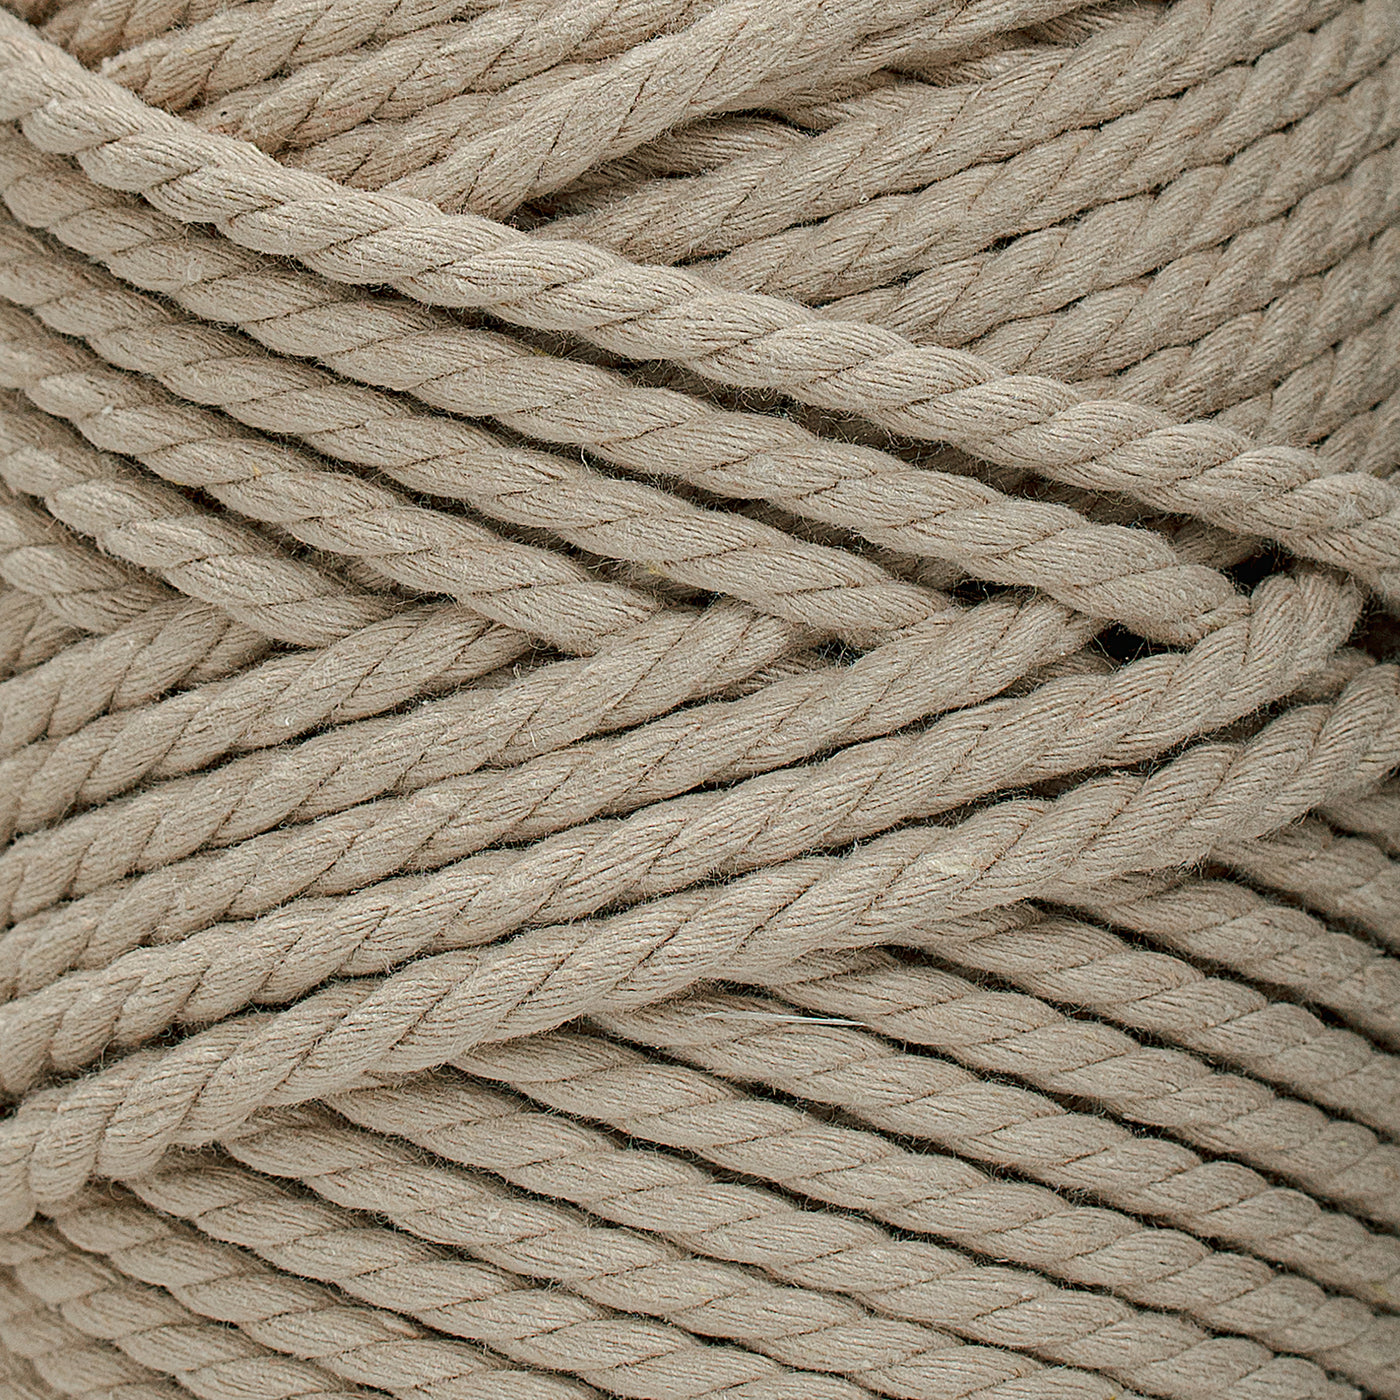 COTTON ROPE ZERO WASTE 5 MM - 3 PLY - BEIGE COLOR